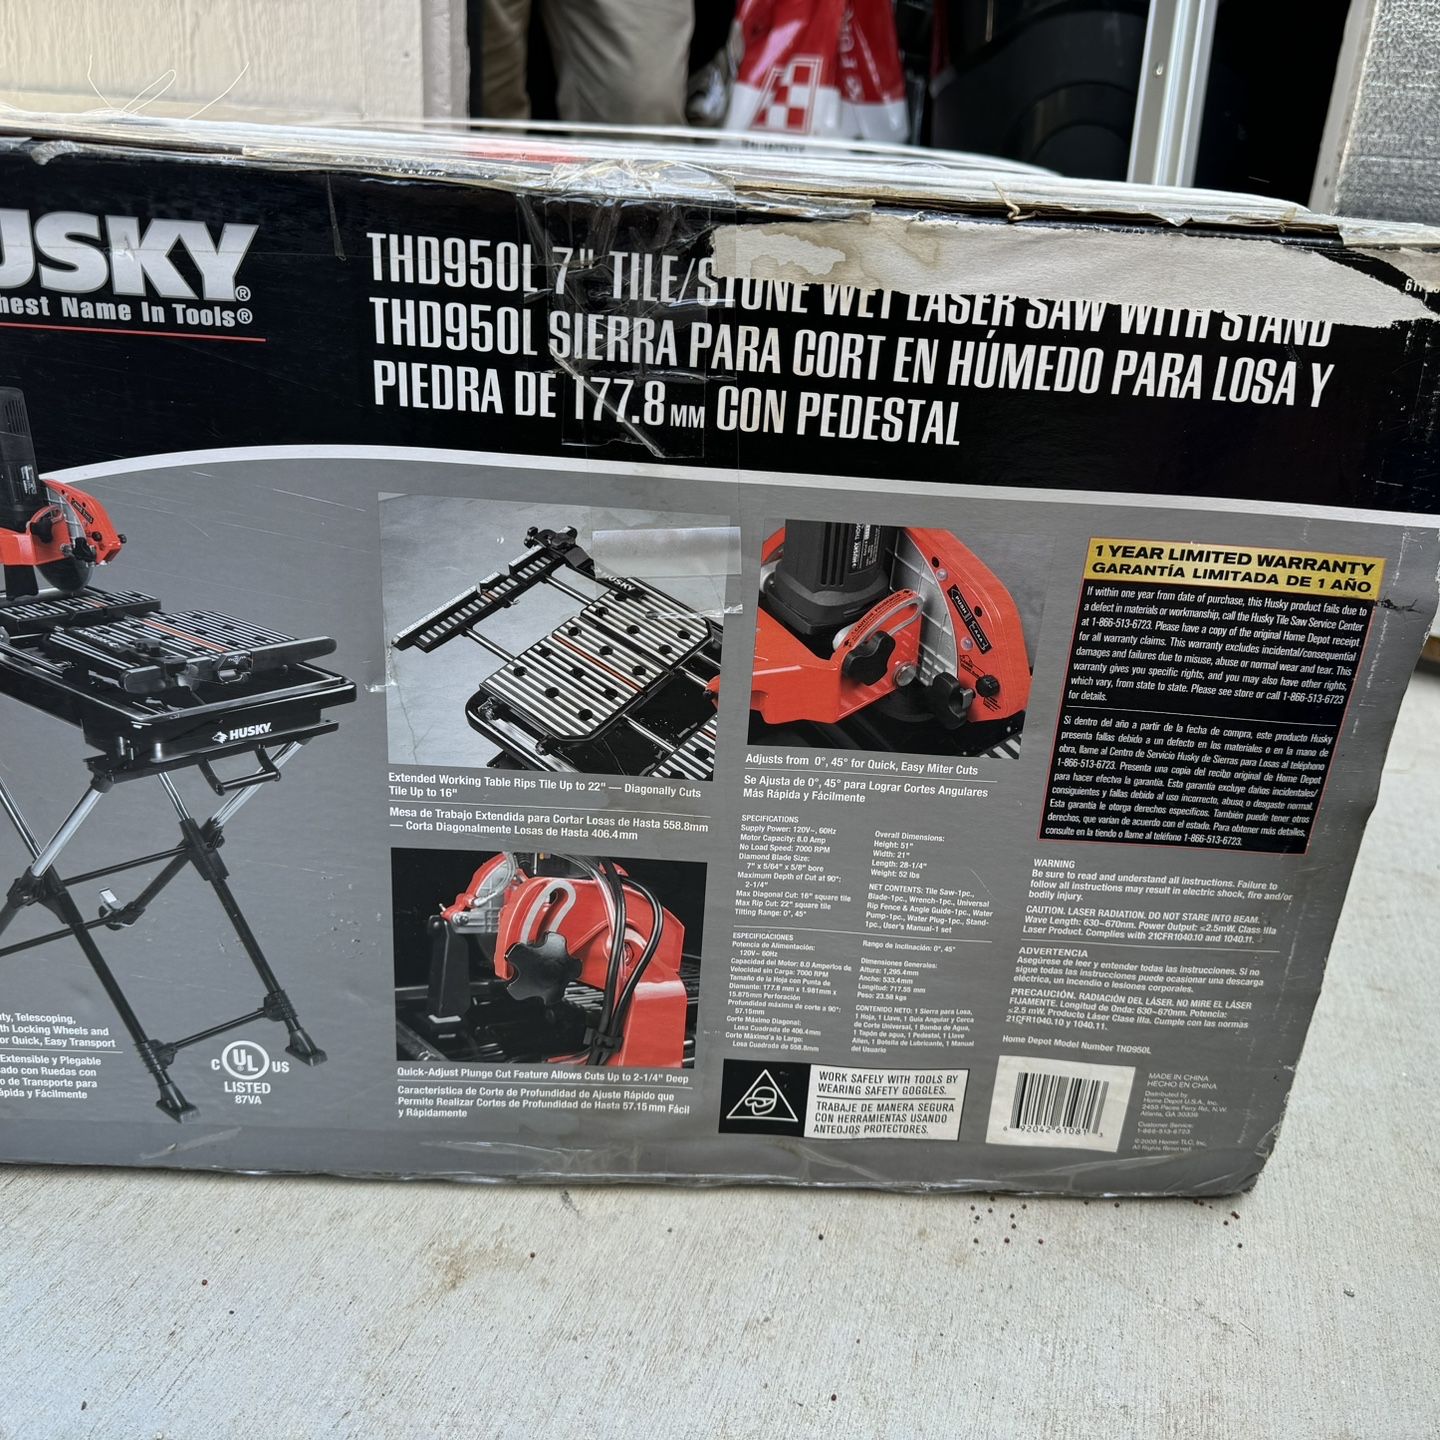 Husky THD950L Tile Saw with Stand